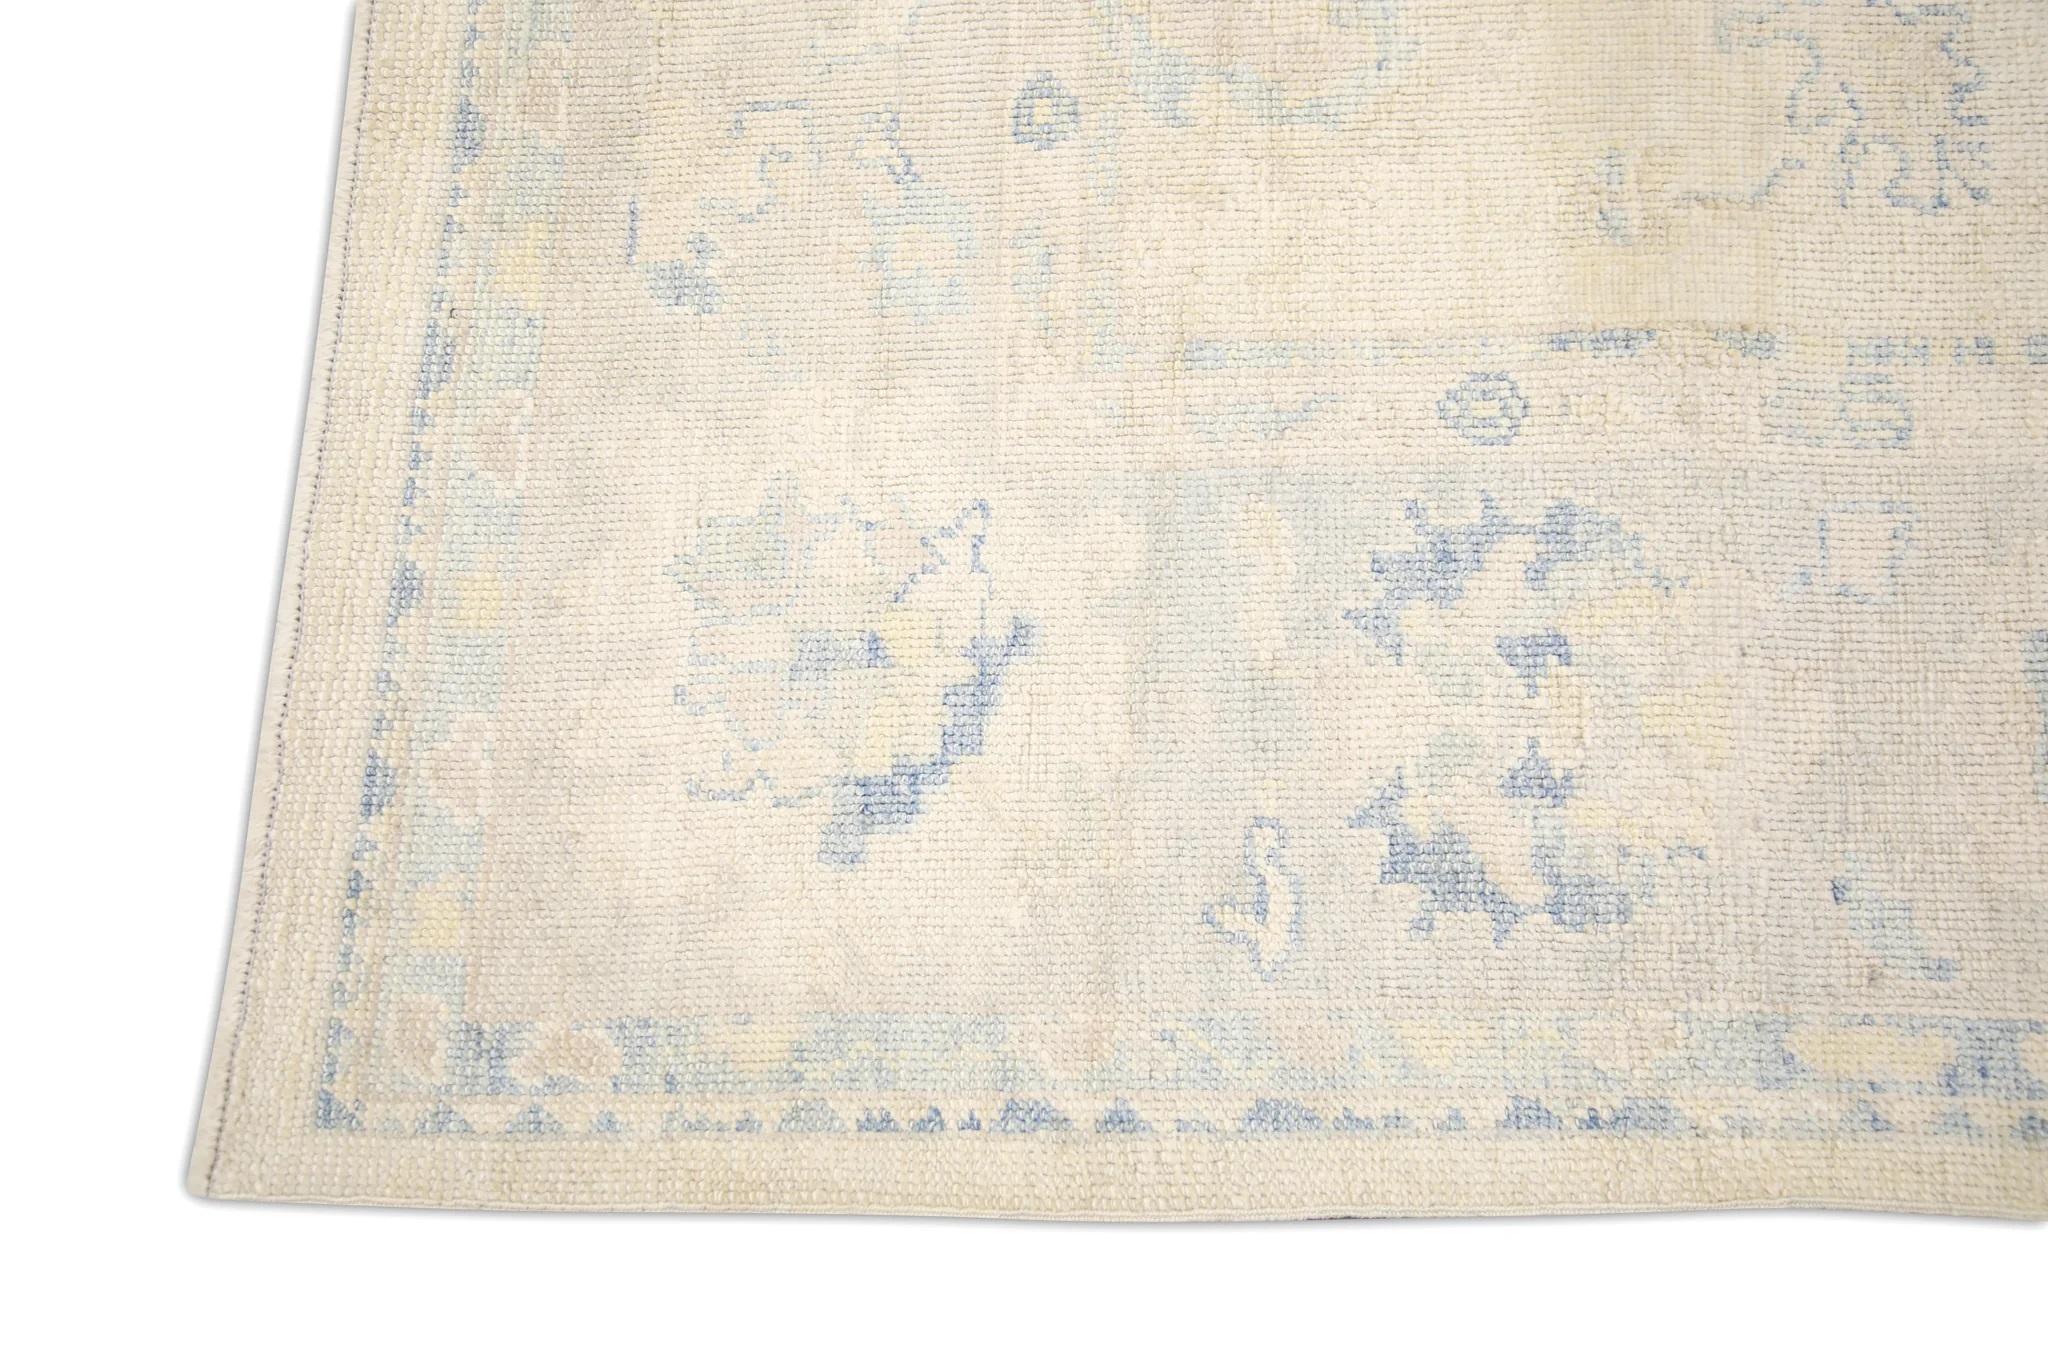 Vegetable Dyed Cream Handwoven Wool Turkish Oushak Rug in Blue & Pink Floral Design 8' x 9'8